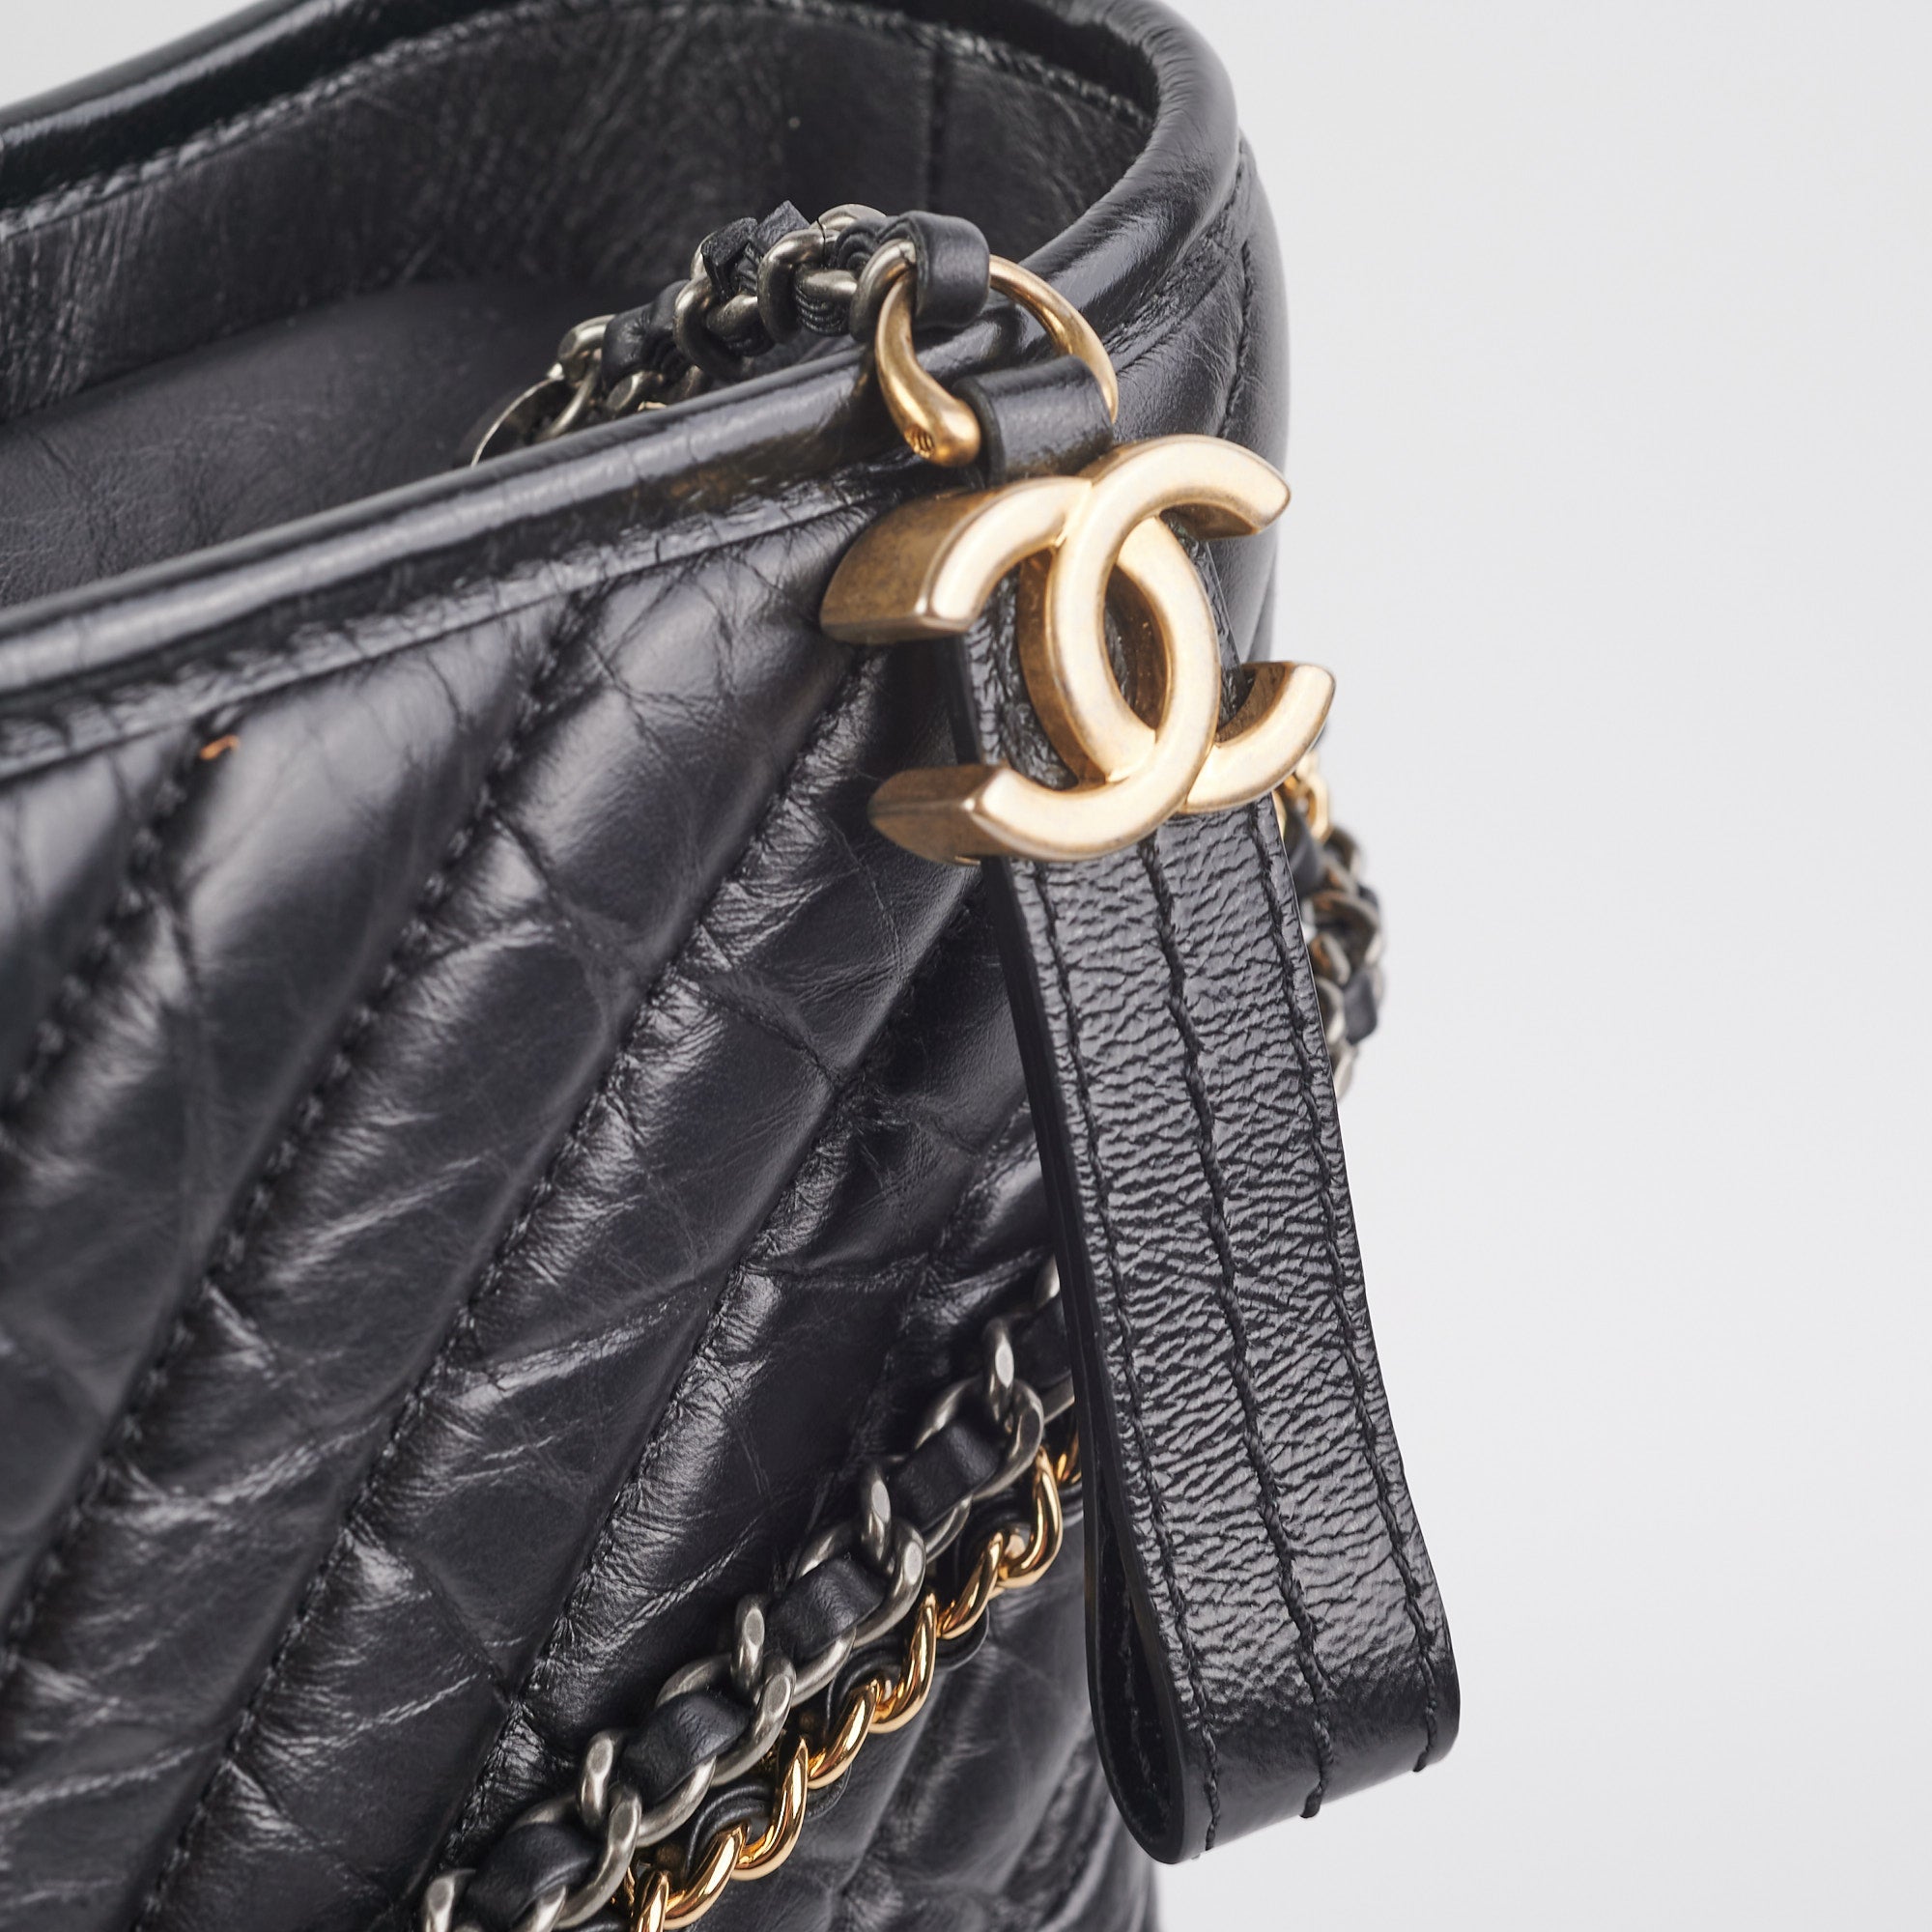 CHANEL 2022 SS Chanel's Gabrielle Large Hobo Bag (A93824 Y61477 94305)